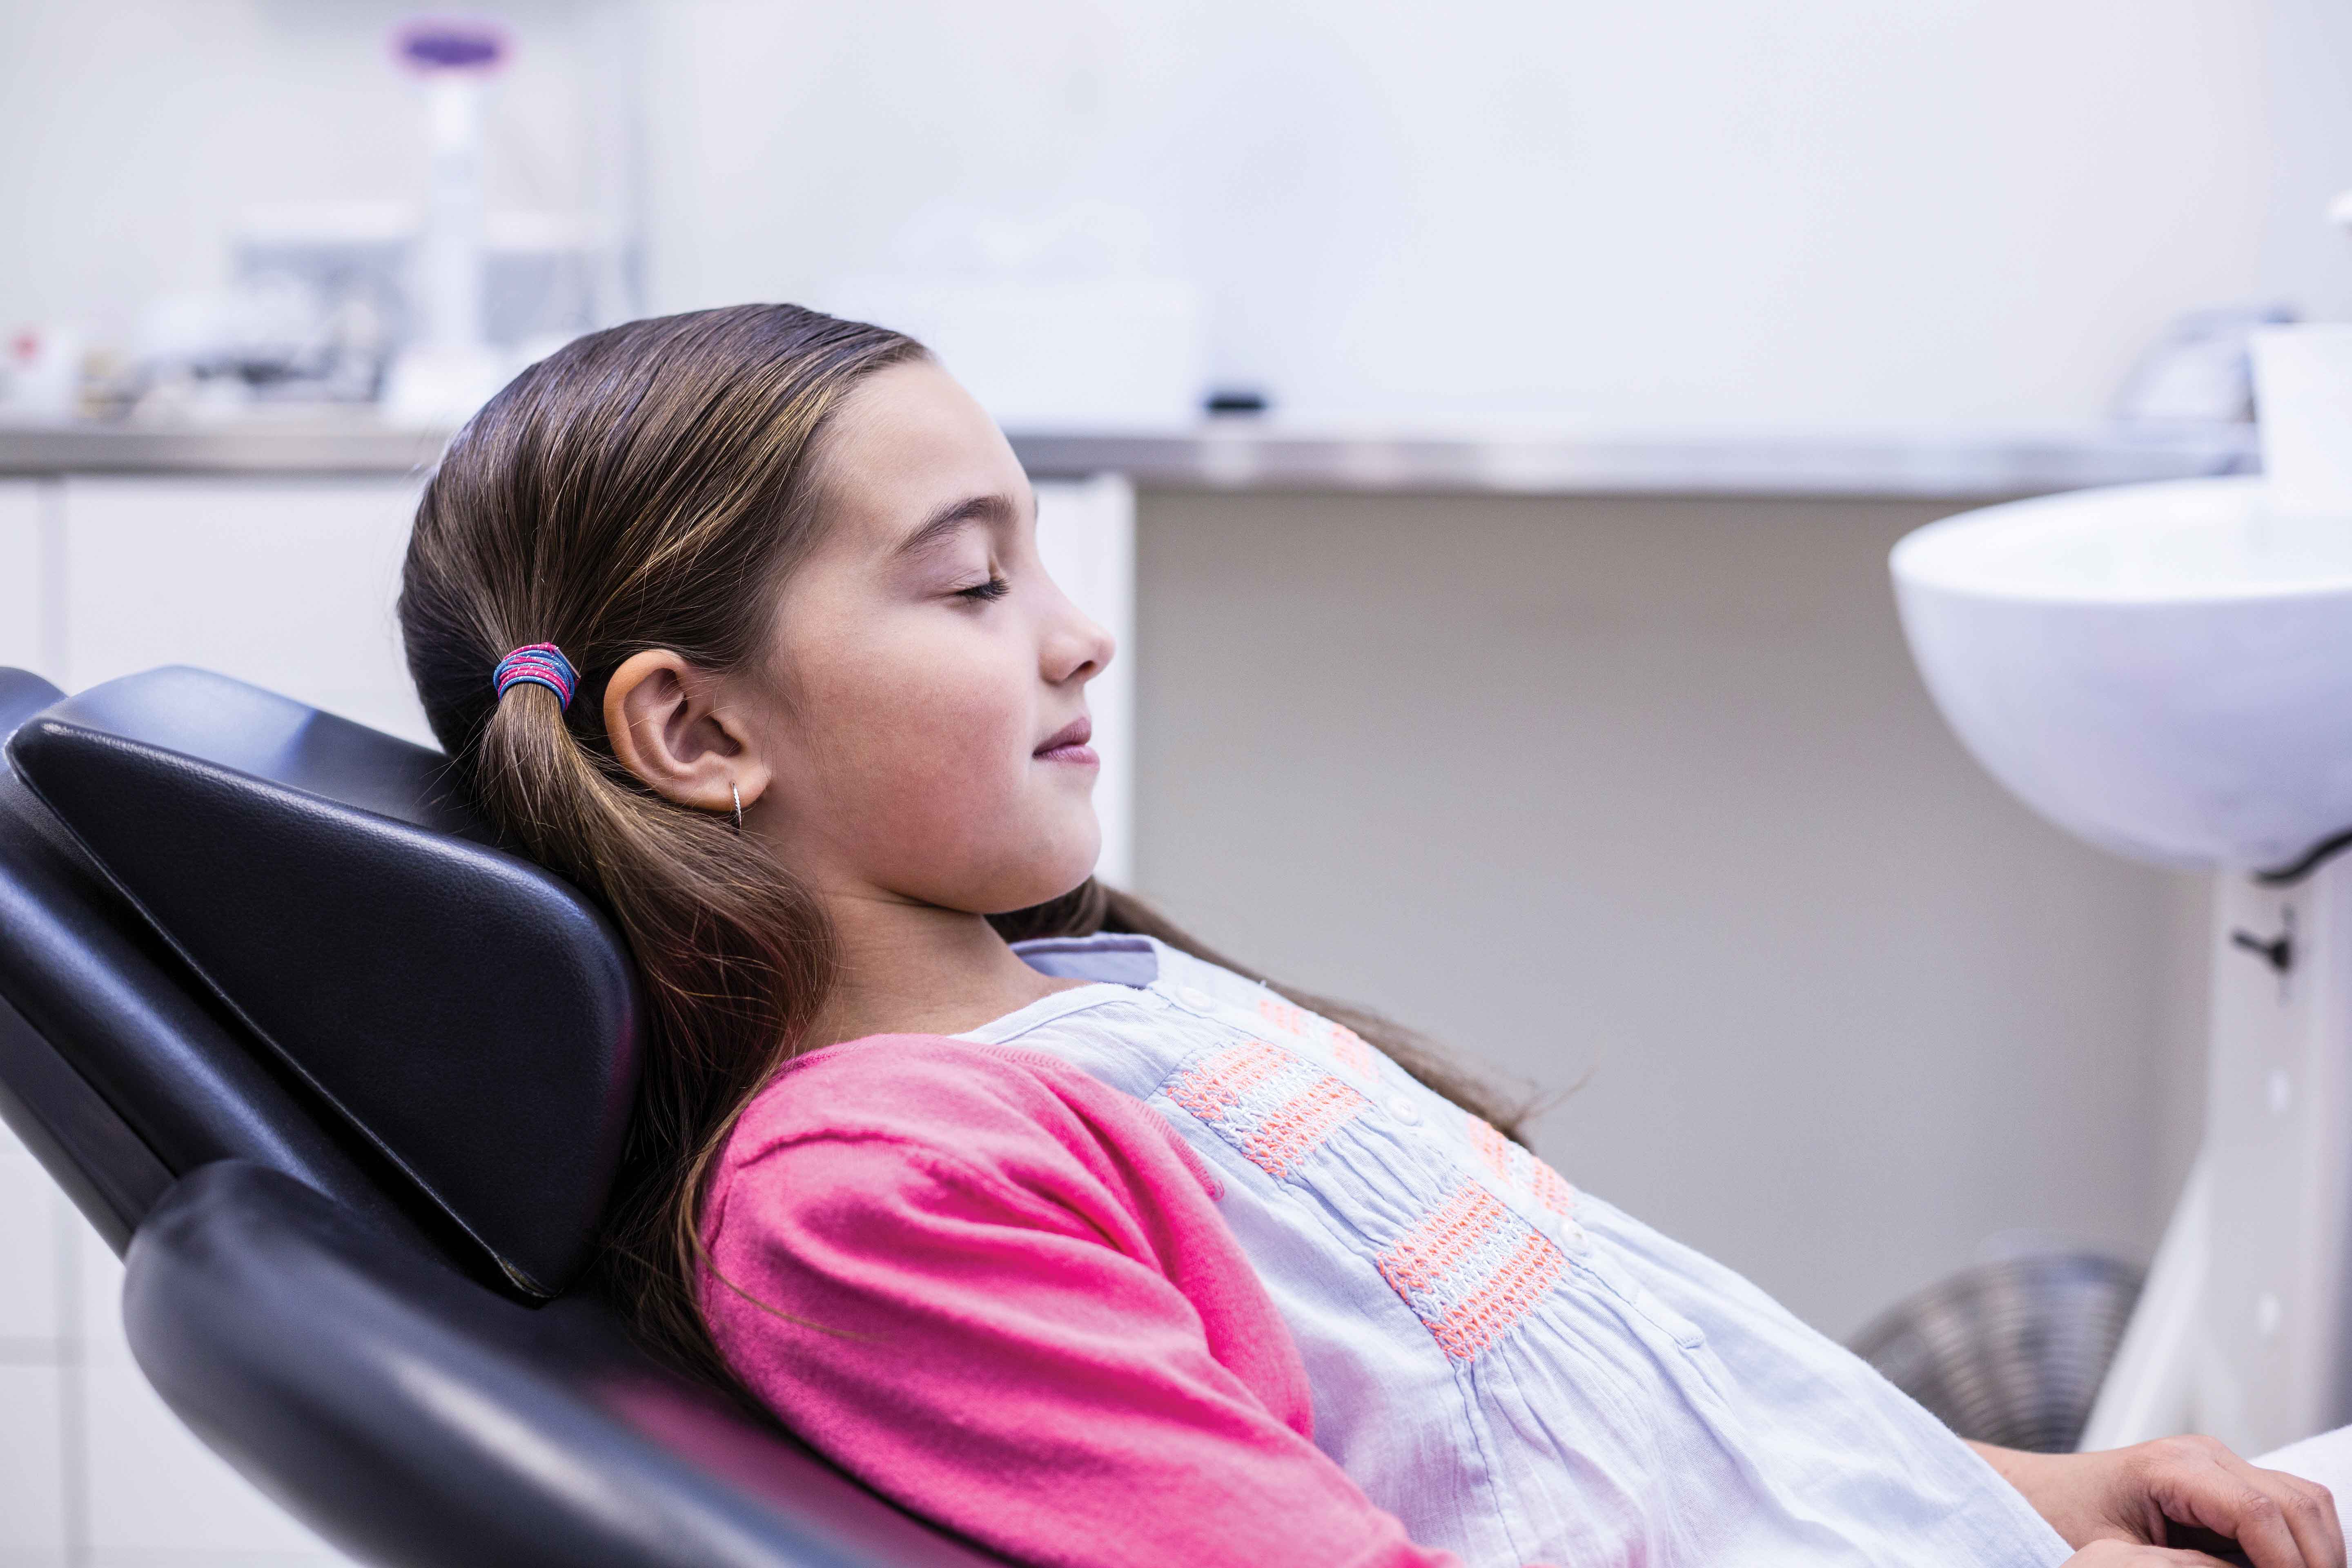 Oman wellness: Why opting for conscious sedation for your child is a really good idea?